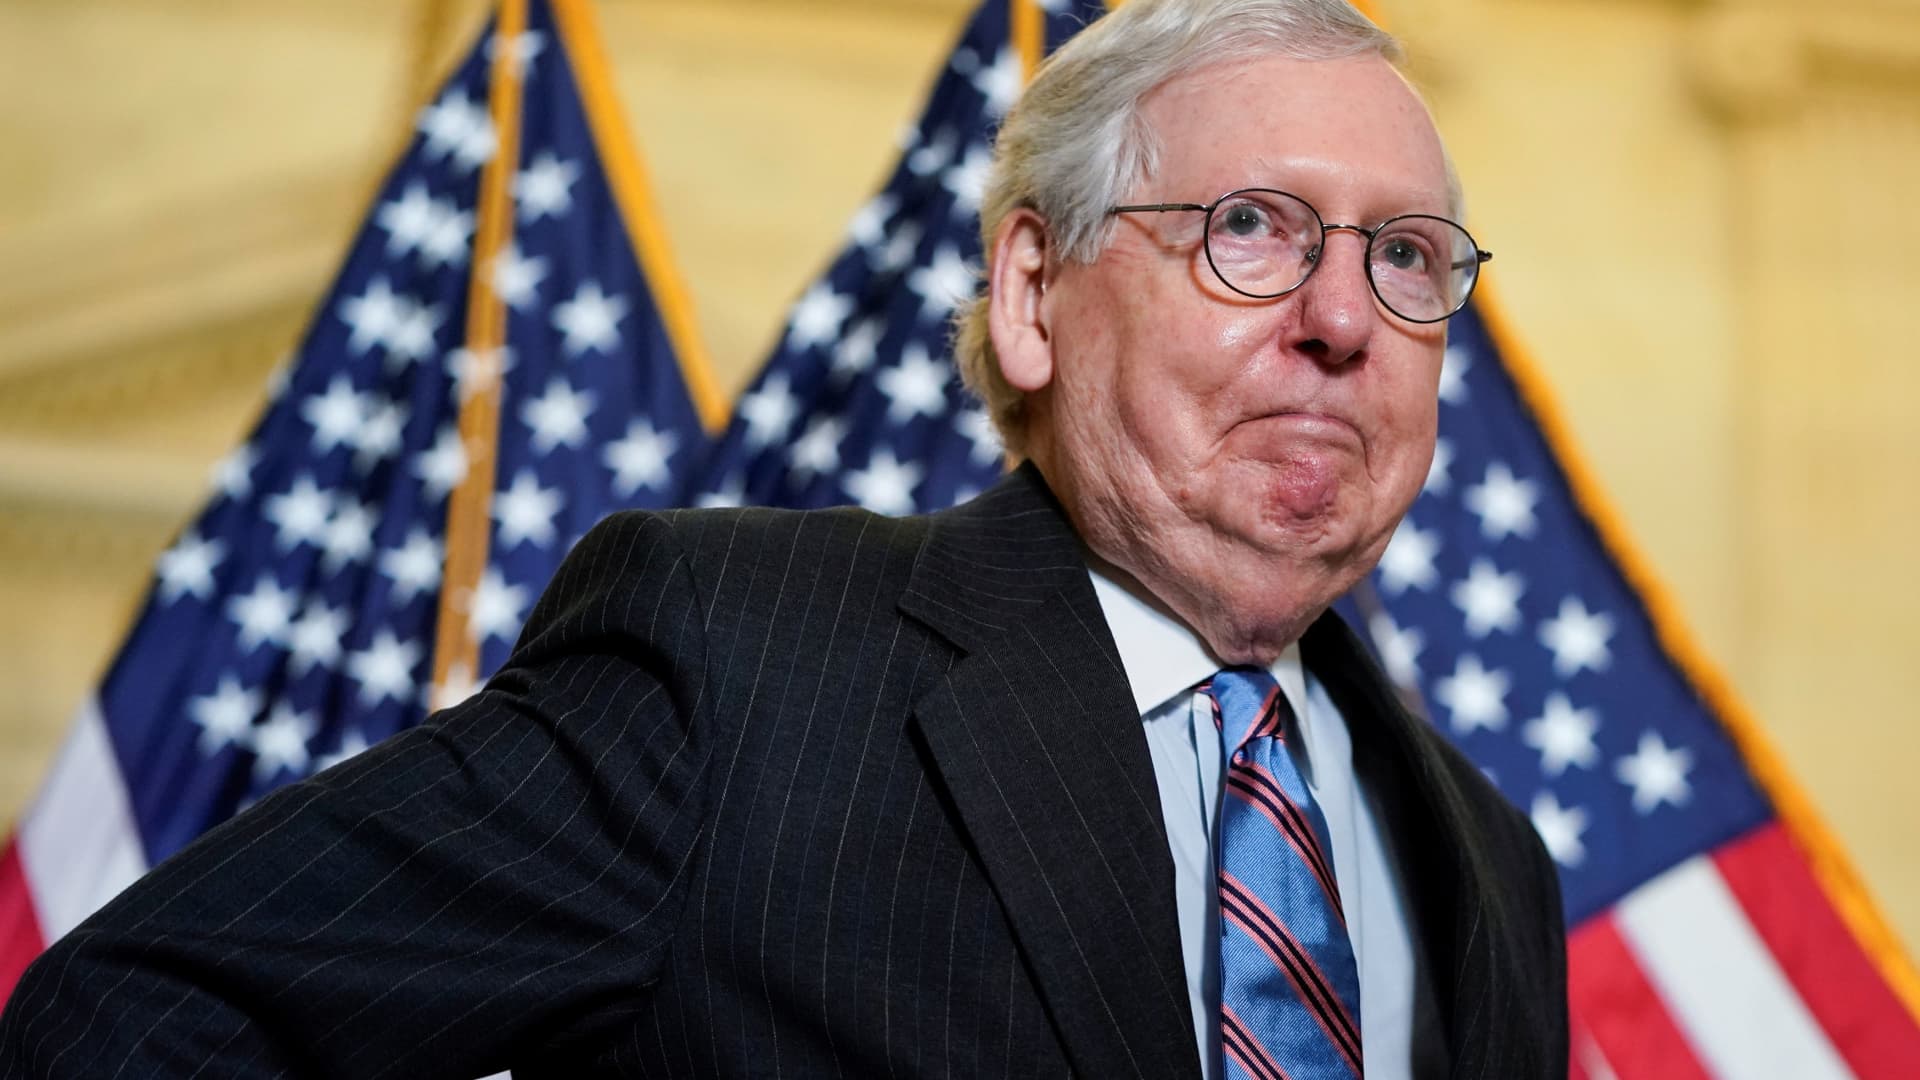 Senate Minority Leader Mitch McConnell (R-KY) arrives to speak after the Republican caucus policy luncheon on Capitol Hill in Washington, April 13, 2021.